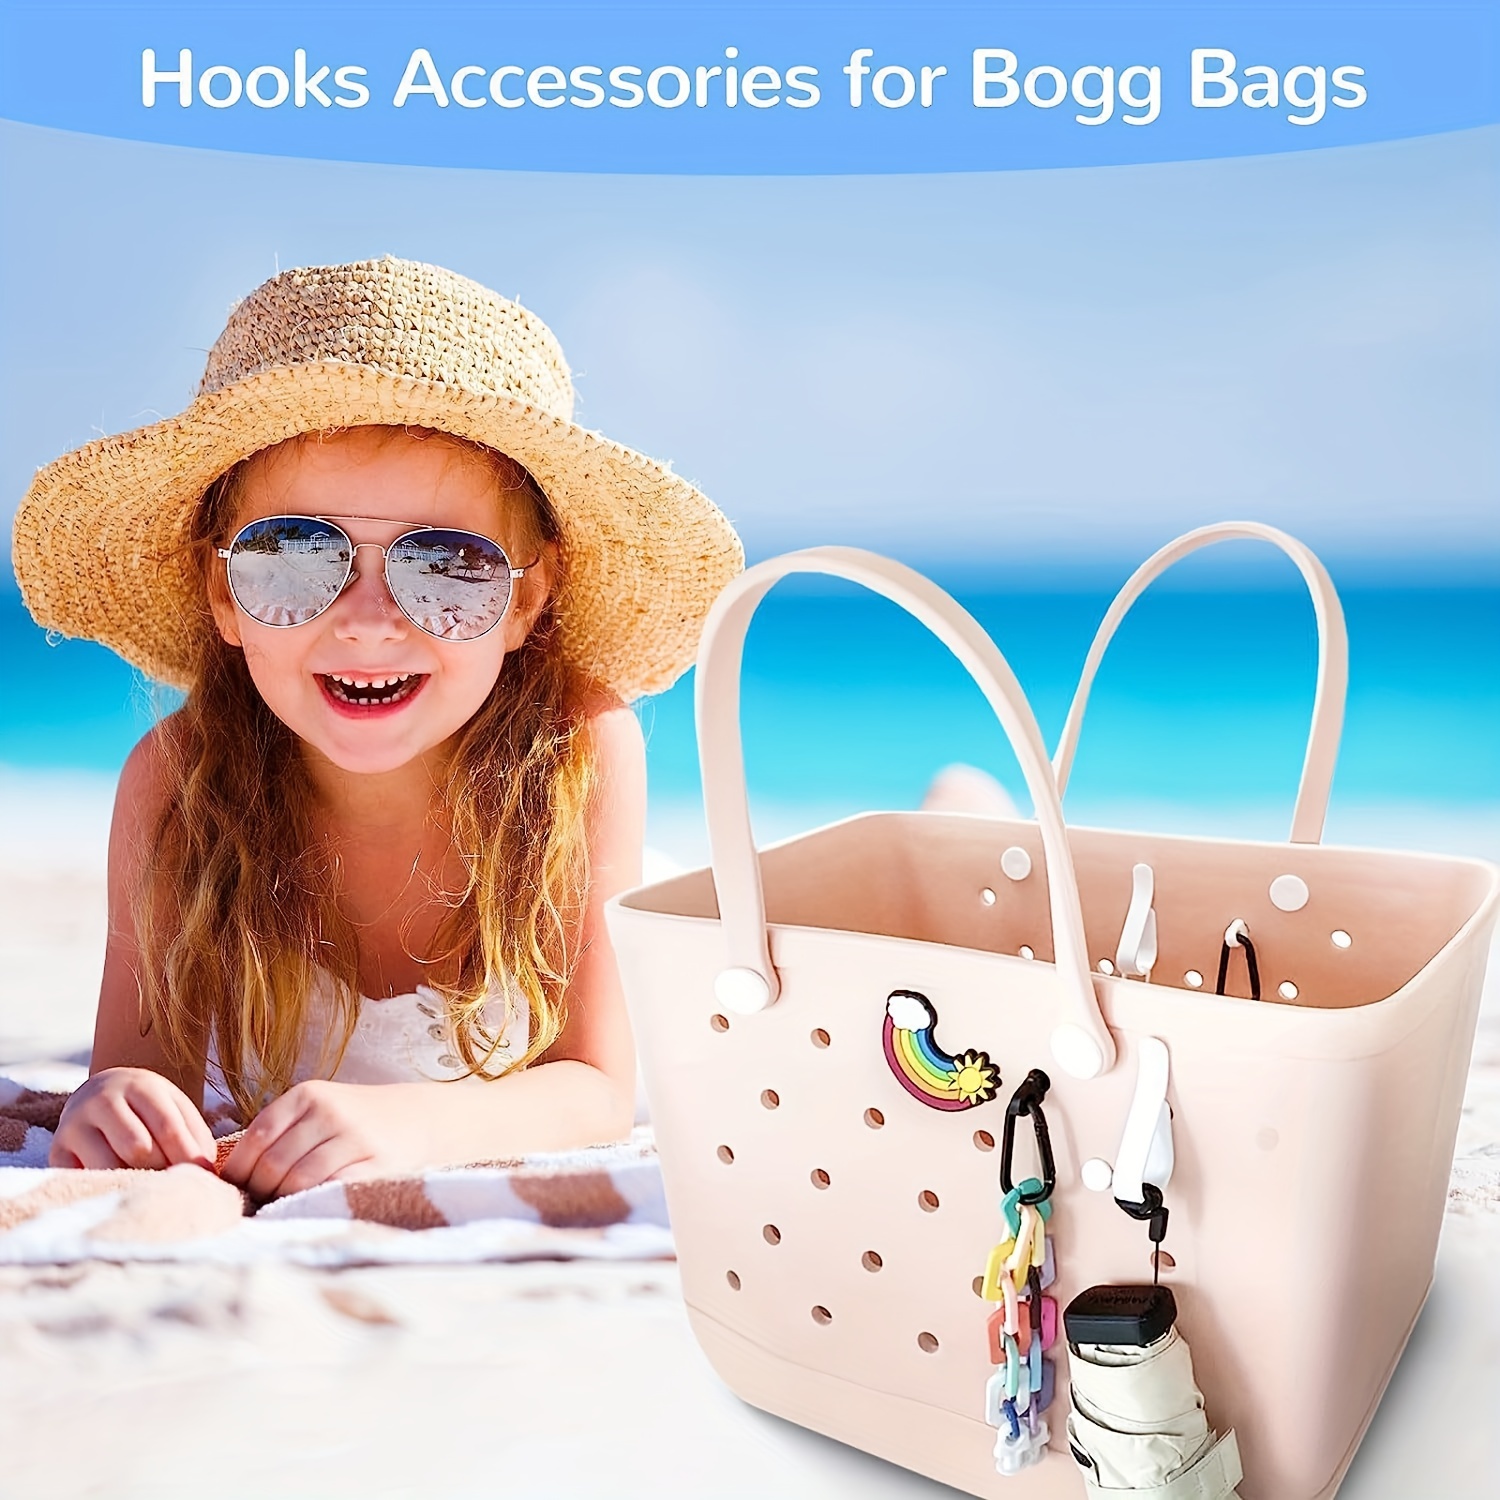 4pcs Hooks, Hooks Accessories For Bogg Bags, Hook Hang Charms For